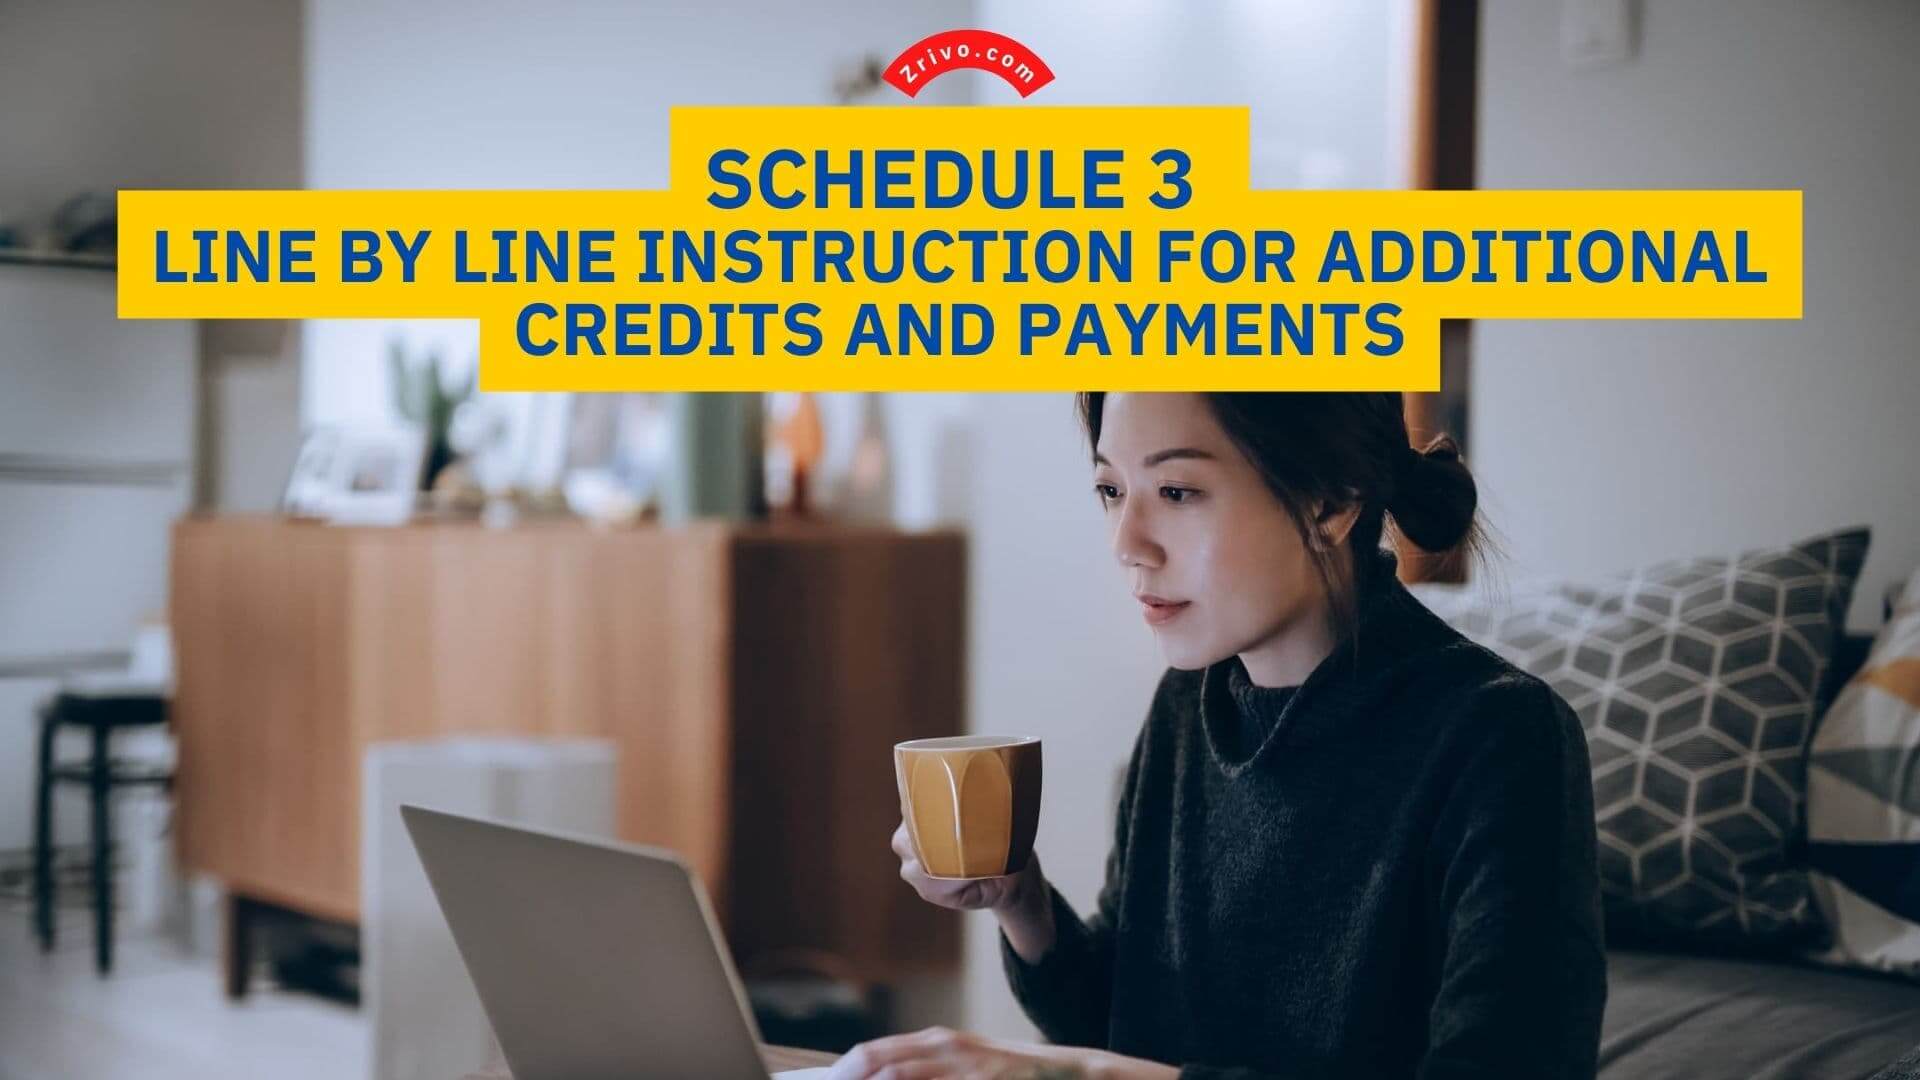 Schedule-3-Line-By-Line-Instruction-For-Additional-Credits-and-Payments-Zrivo-Cover-1